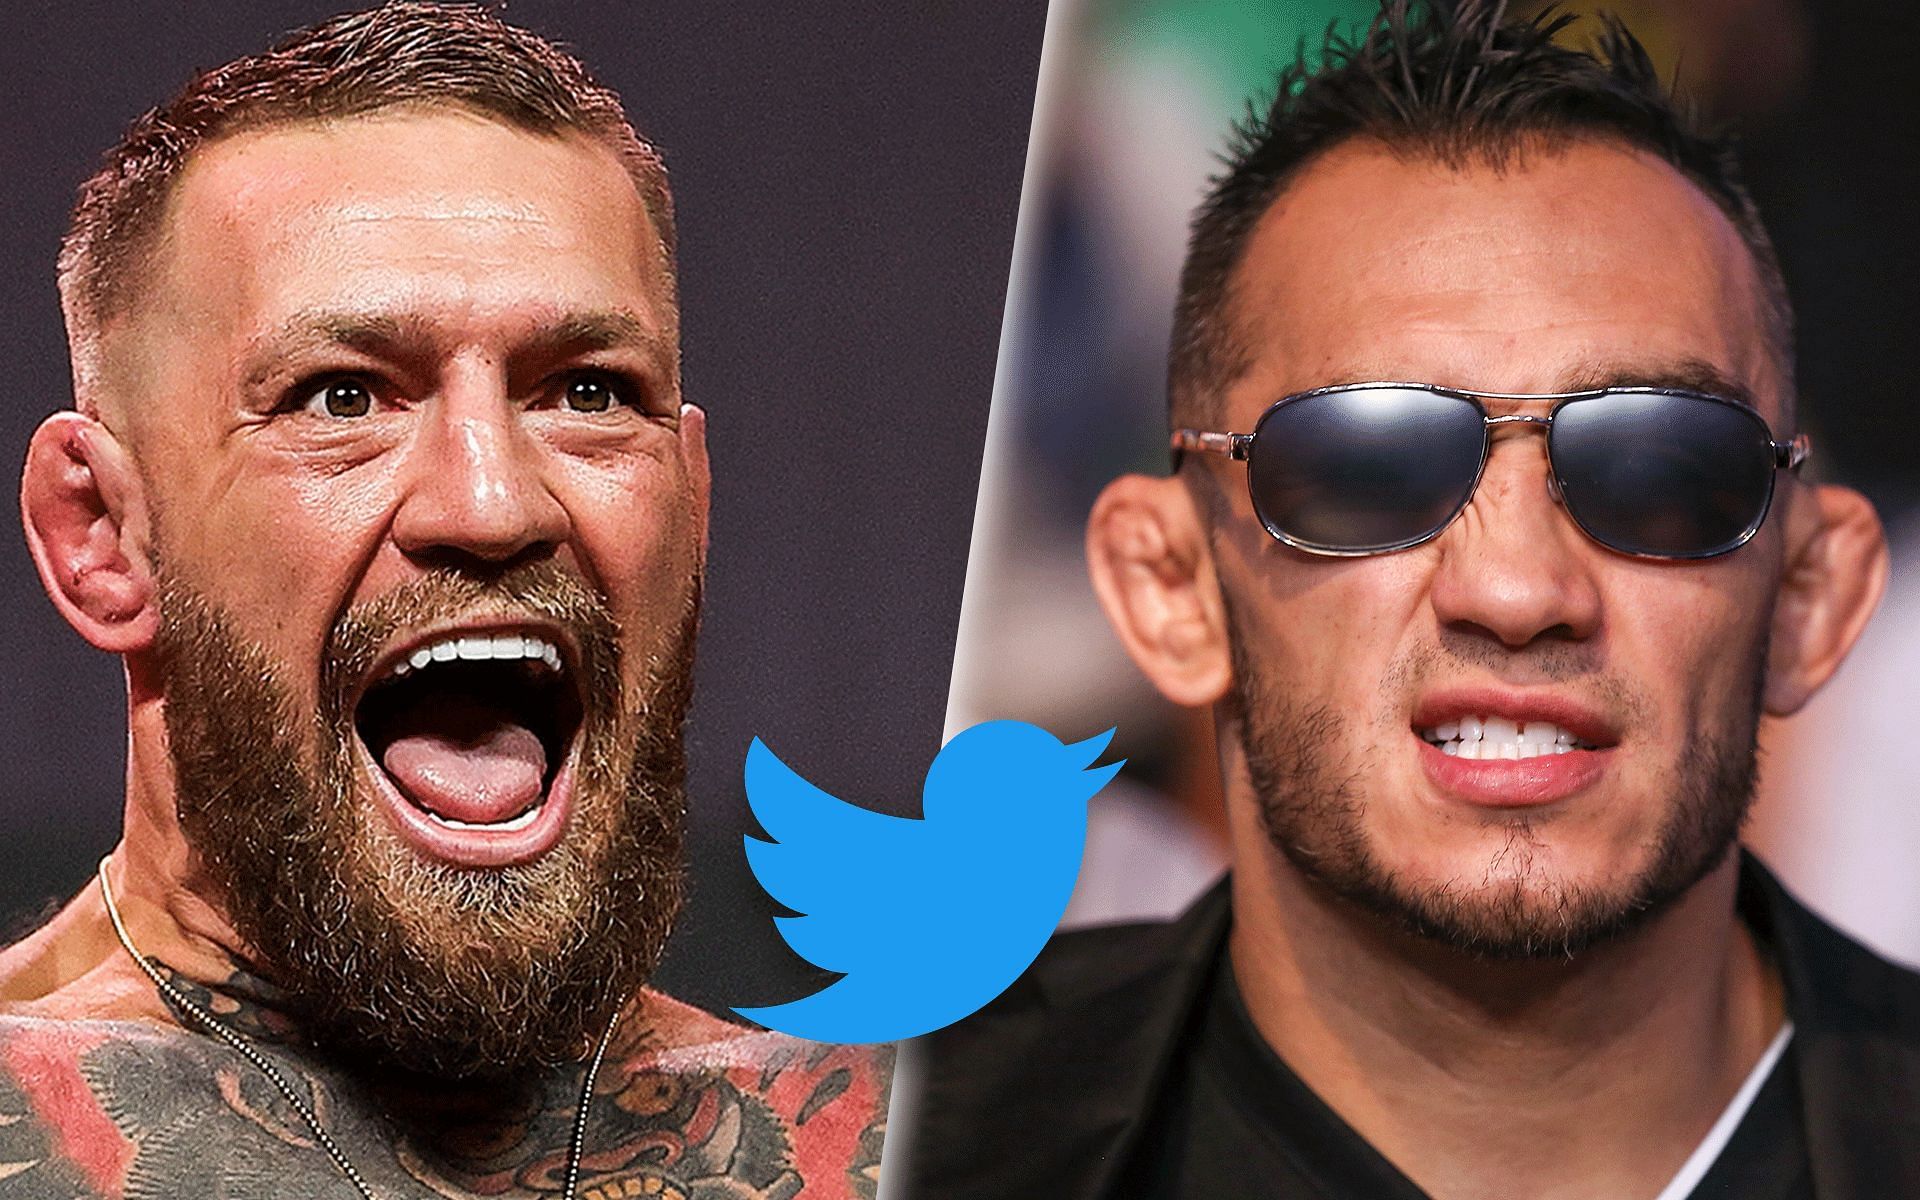 Conor McGregor was unhappy with his feud against Tony Ferguson [Photo credits: Twtitter.com]